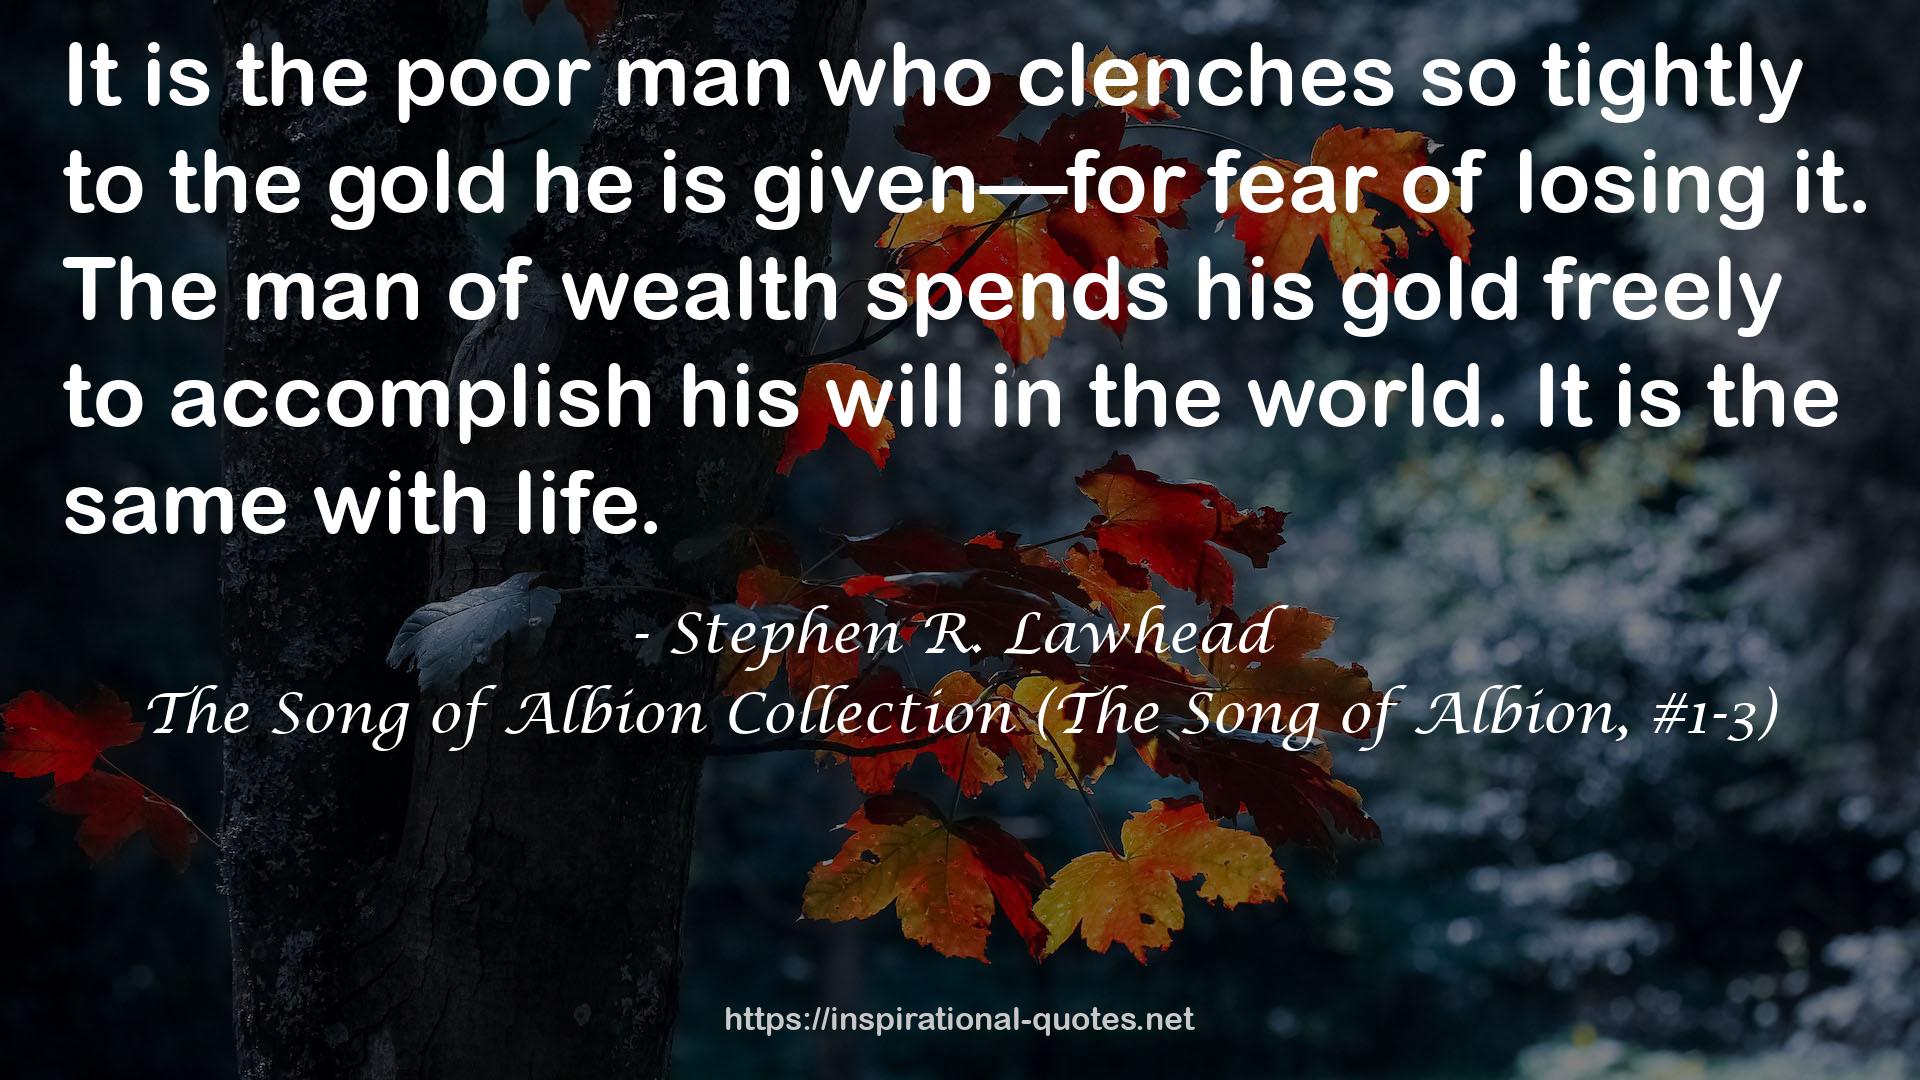 The Song of Albion Collection (The Song of Albion, #1-3) QUOTES